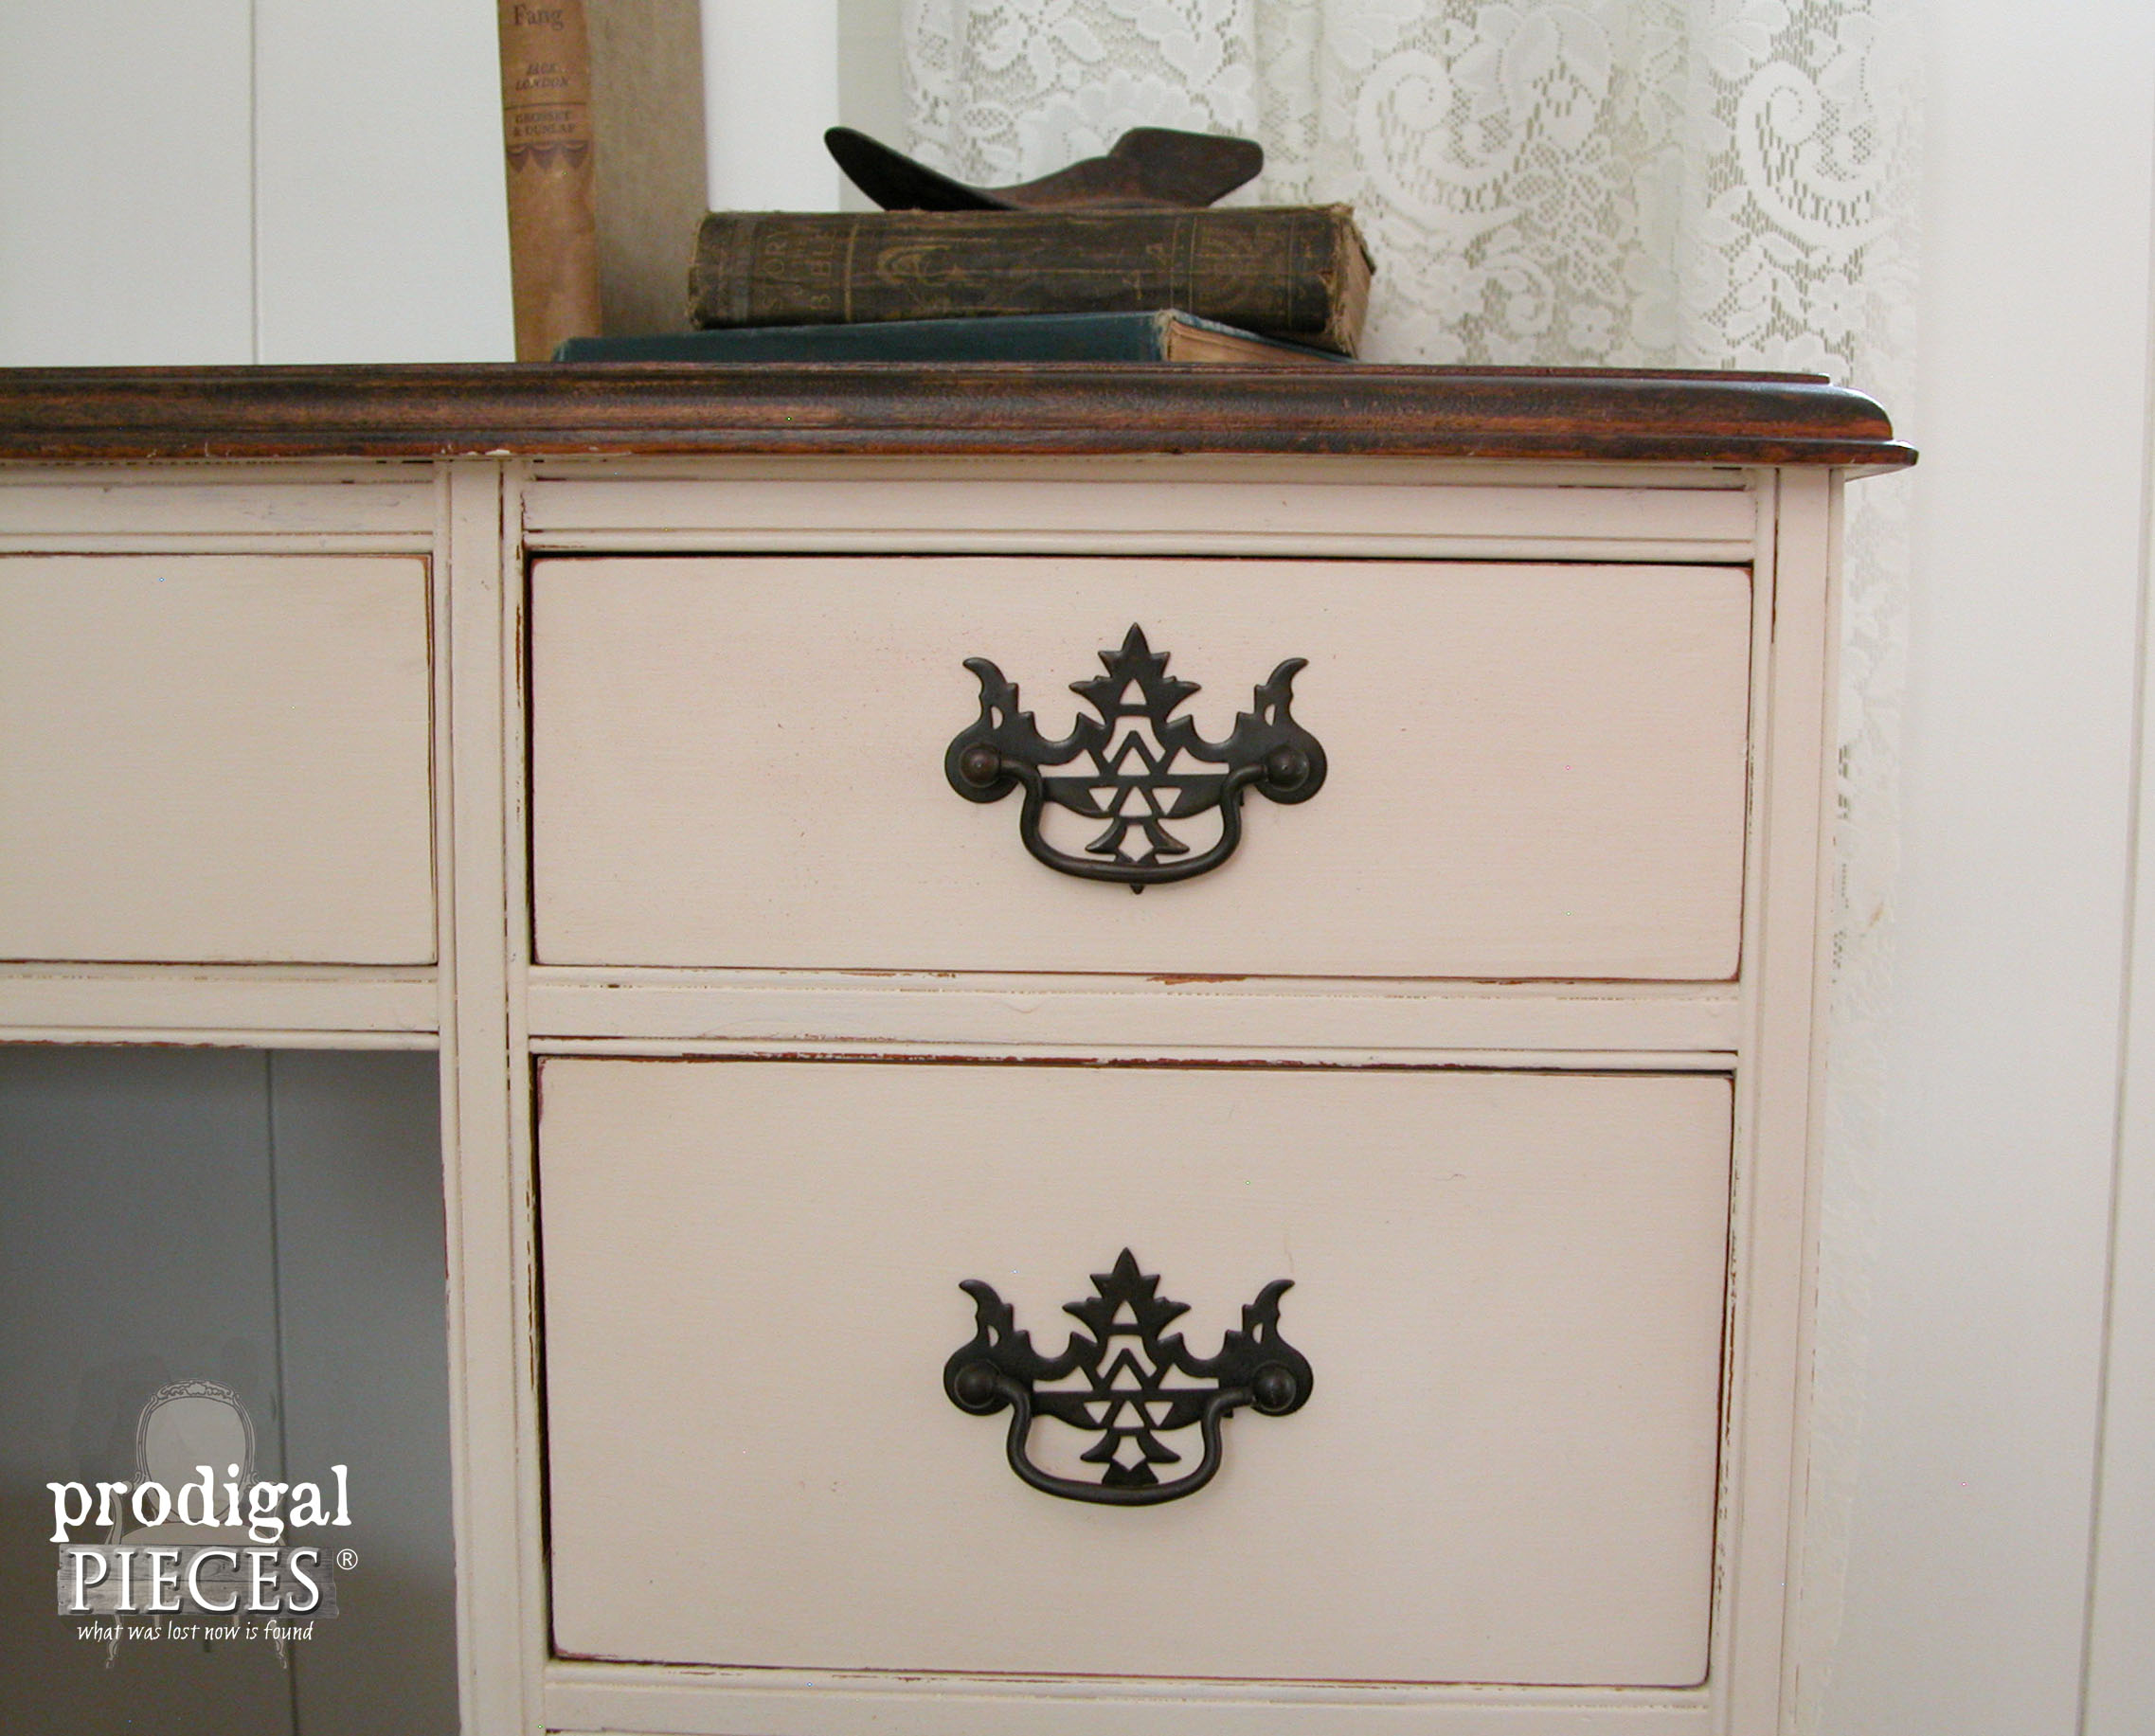 A Craigslist find vintage desk is worn-out and needing a lift. A teenage boy brings it back to being an vintage beauty by Prodigal Pieces www.prodigalpieces.com #prodigalpieces